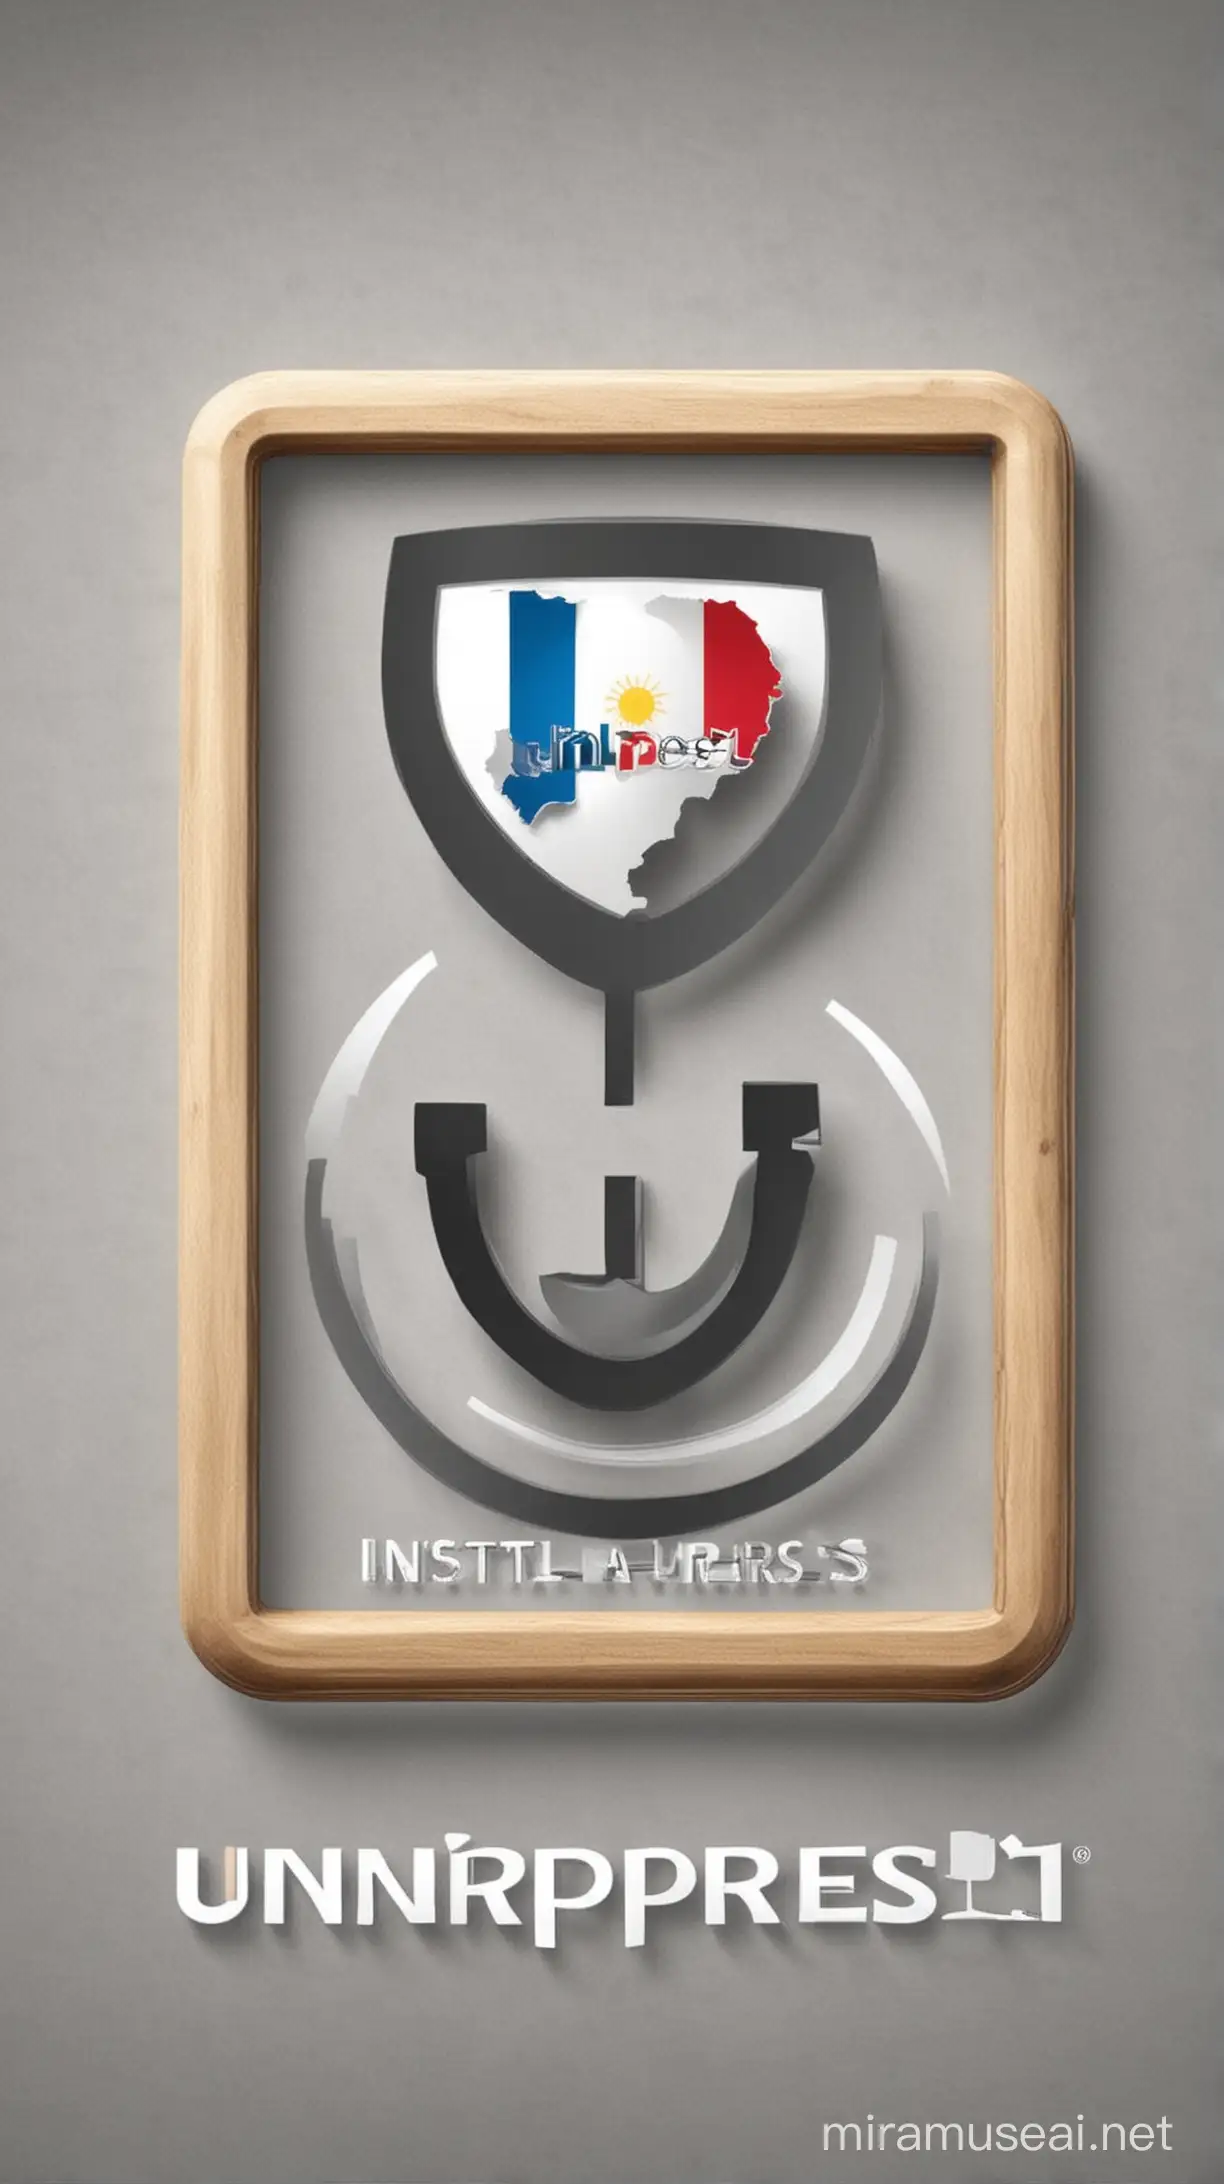 The company Uniprest Instal SRL from Romania has their 15th anniversary today. Generate an image containing their logo which depicts company growth based on technology 